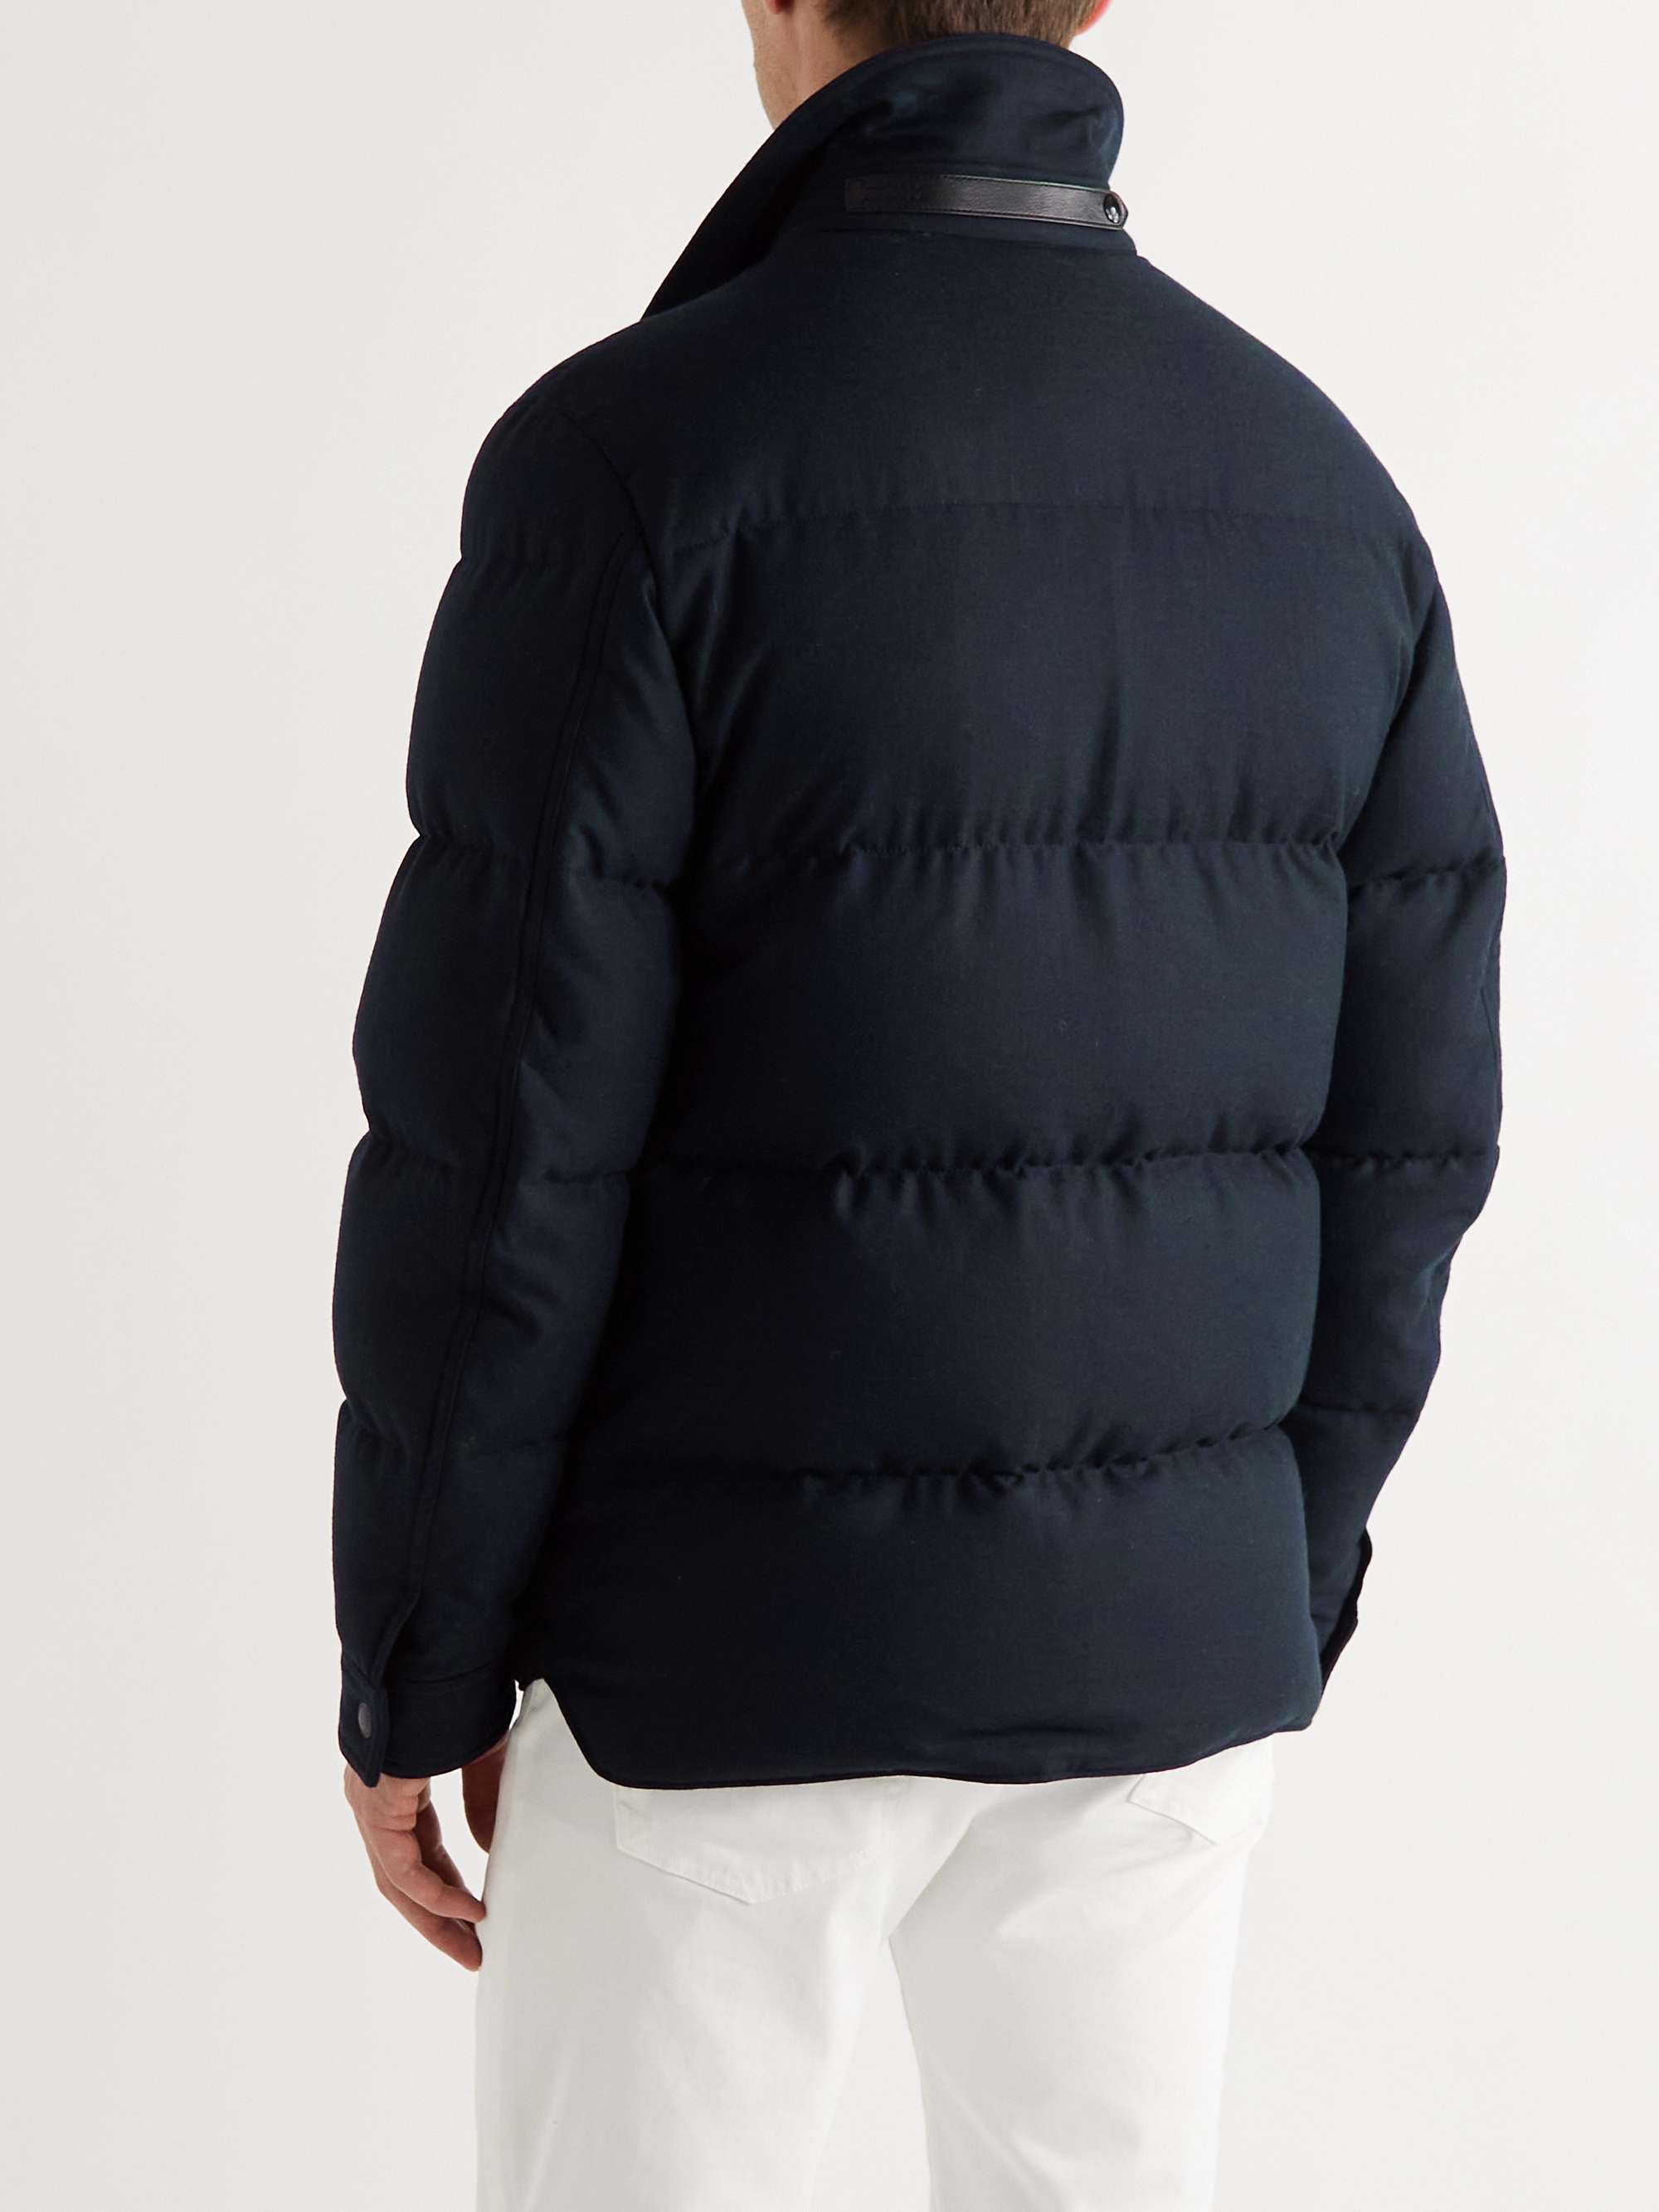 TOM FORD Cashmere and Wool-Bend Down Jacket